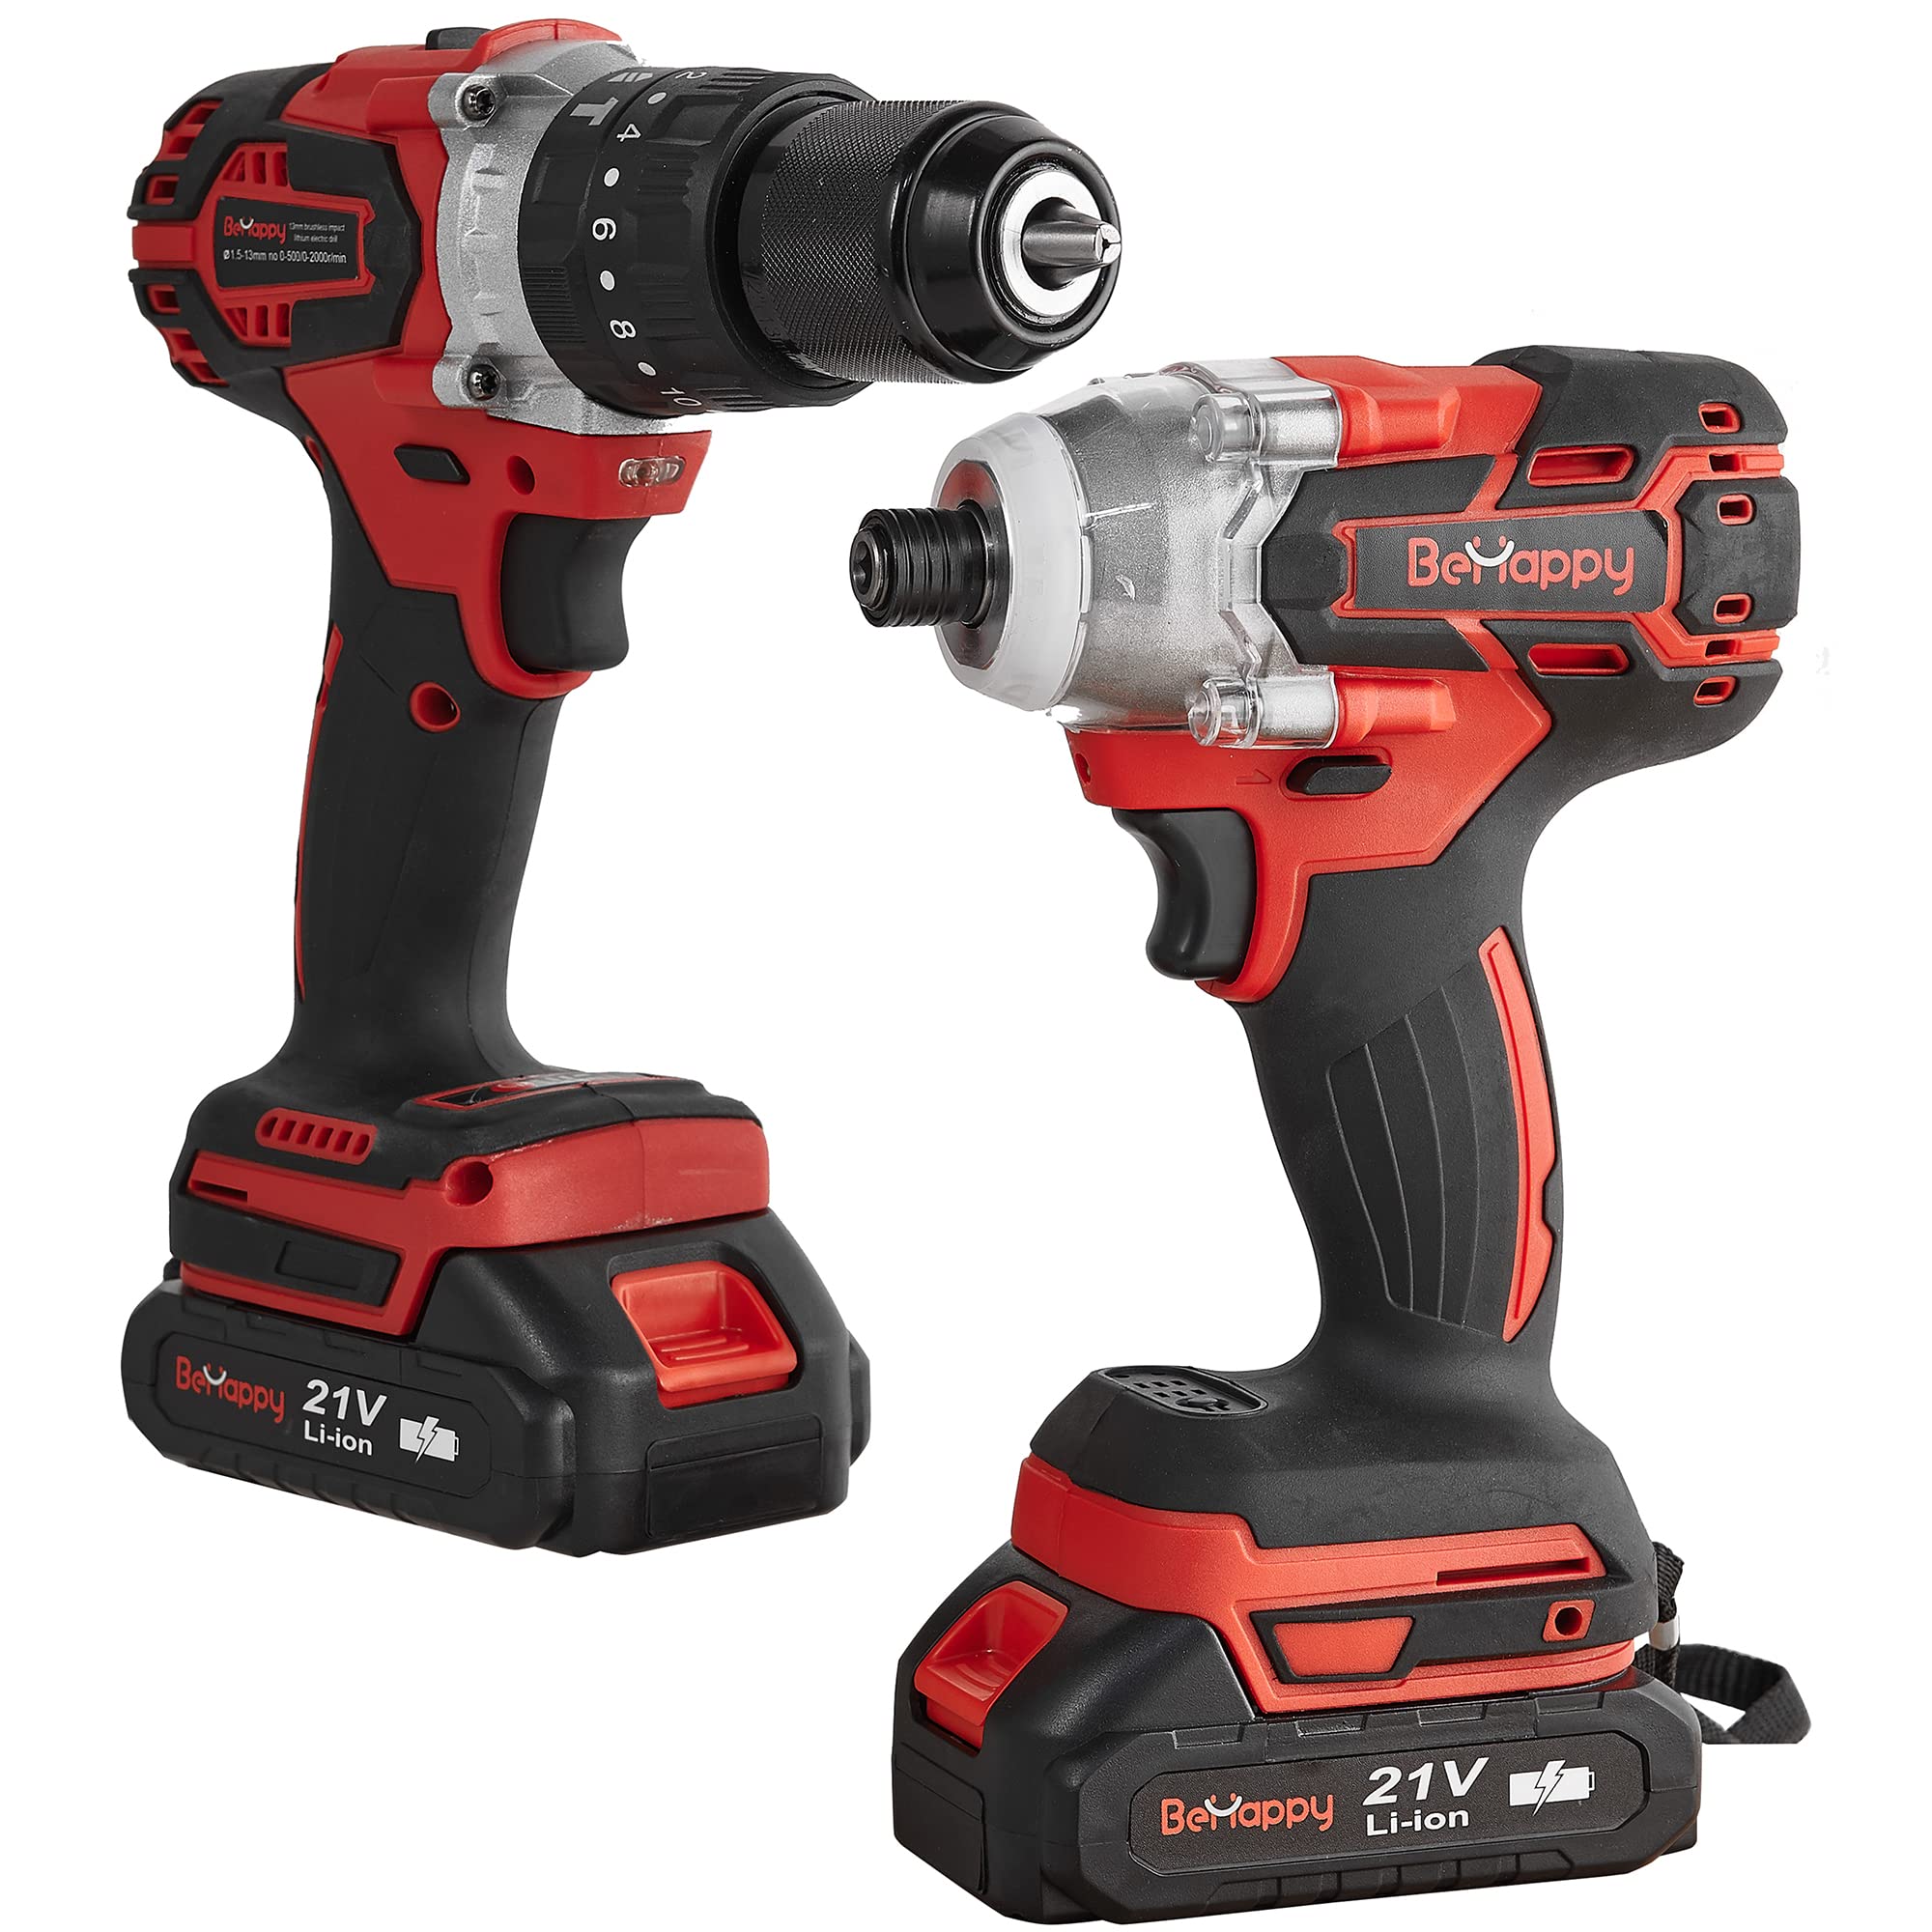 Behappy Cordless Drill Combo Kit 1000ln-lbs Drill Driver and 2600In-lbs Impact Driver 21V Brushless Power Tool Kit with 2 L